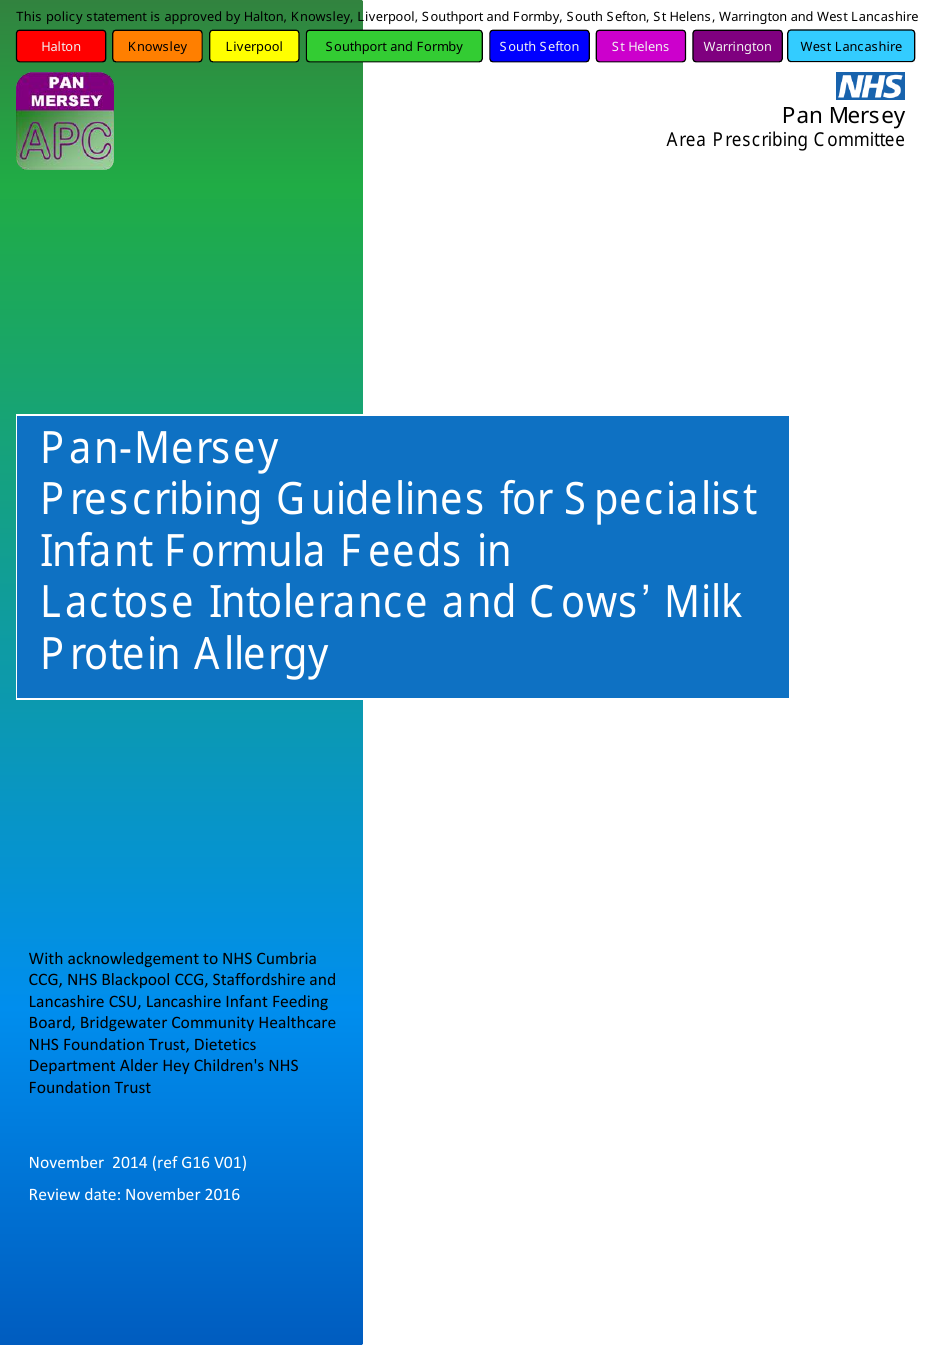 Pan-Mersey Prescribing Guidelines for Specialist Infant Formula Feeds in Lactose Intolerance and Cows Milk Protein Allergy - United Kingdom, Page 1